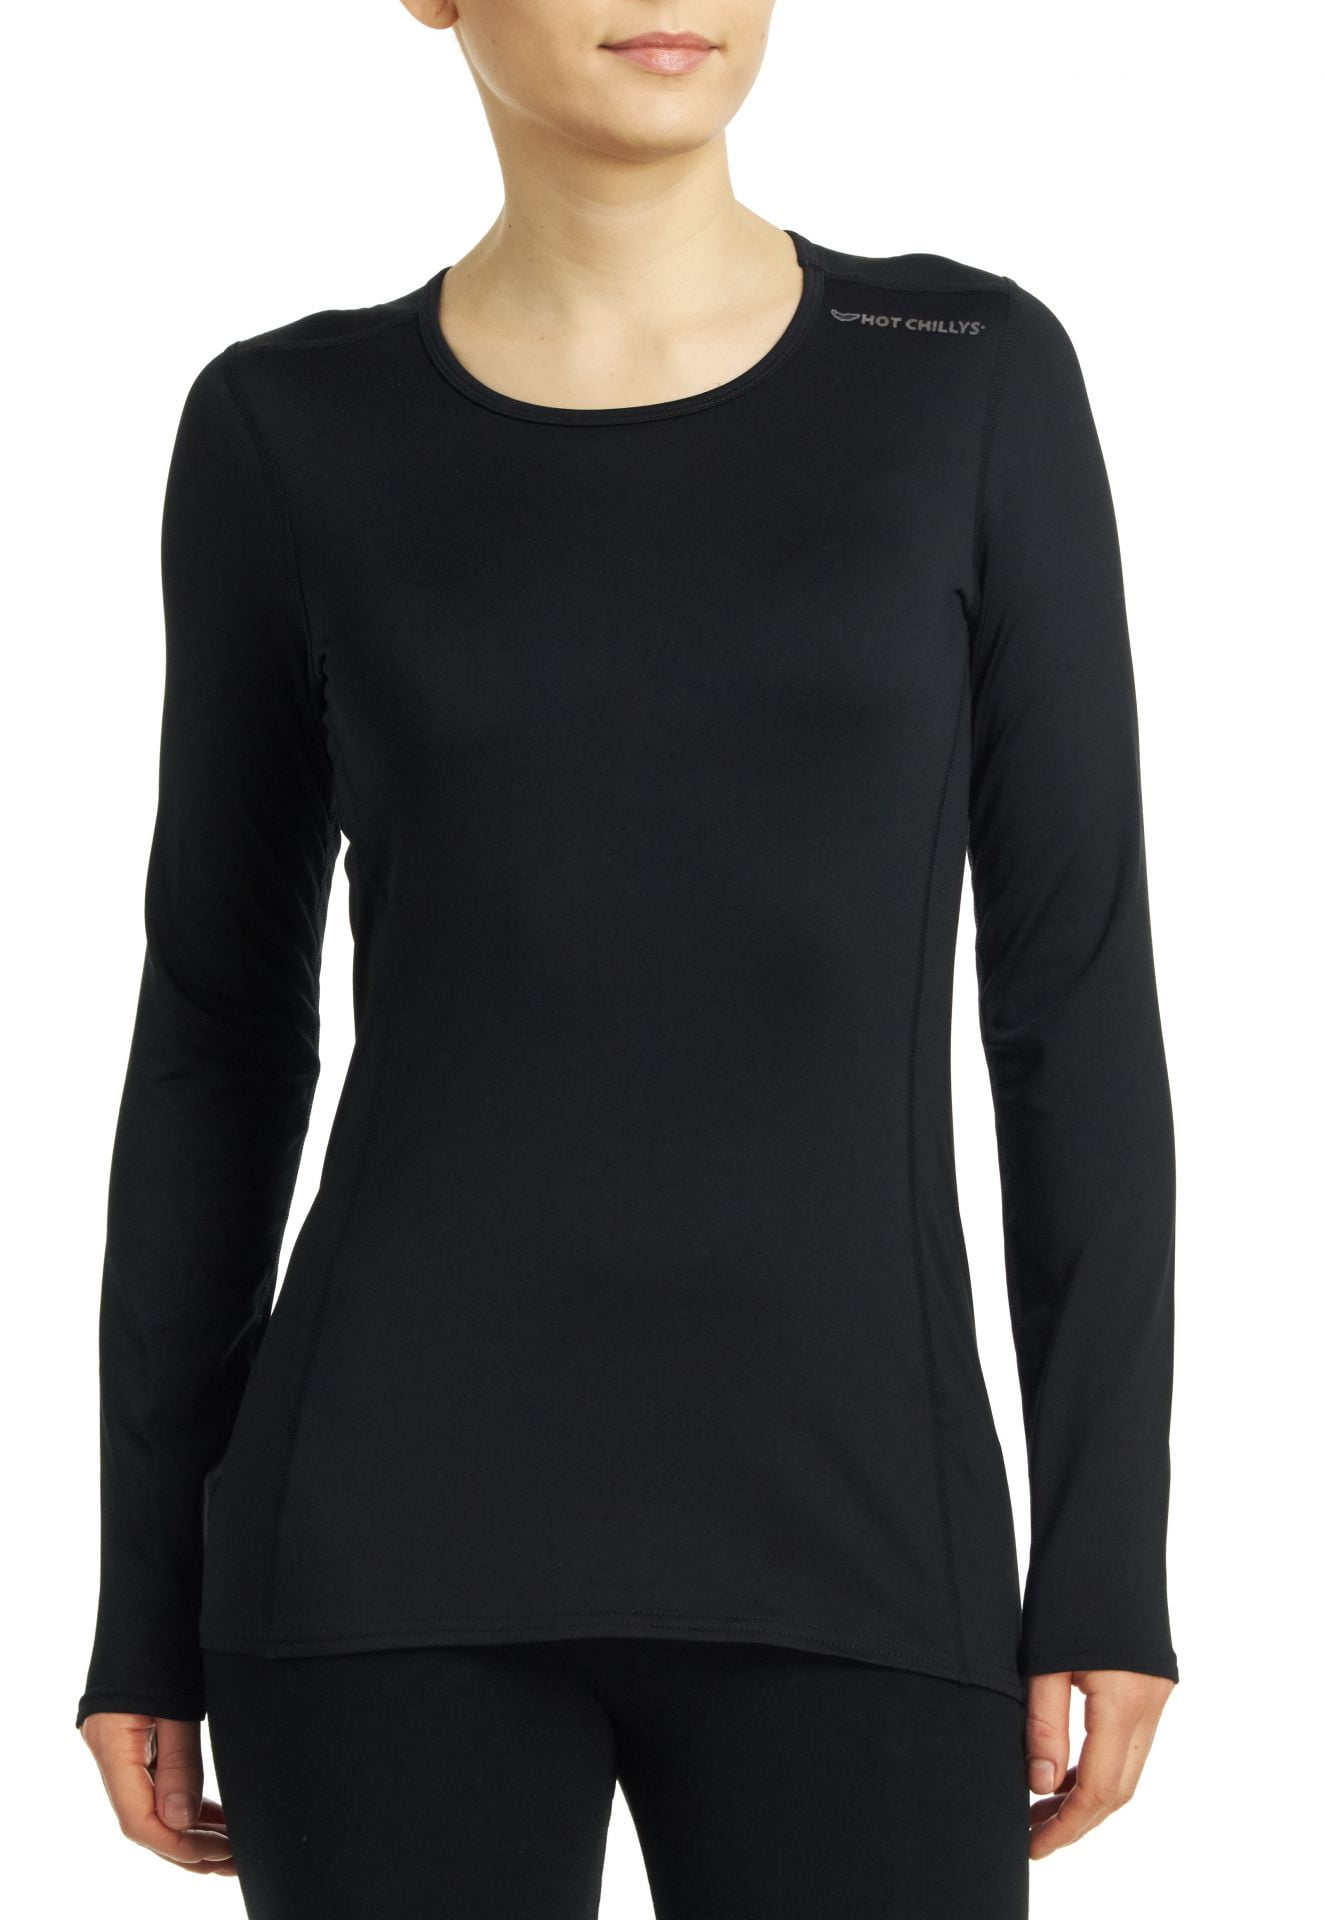 Hot Chillys Womens Micro-Elite Crewneck Base Layer Top